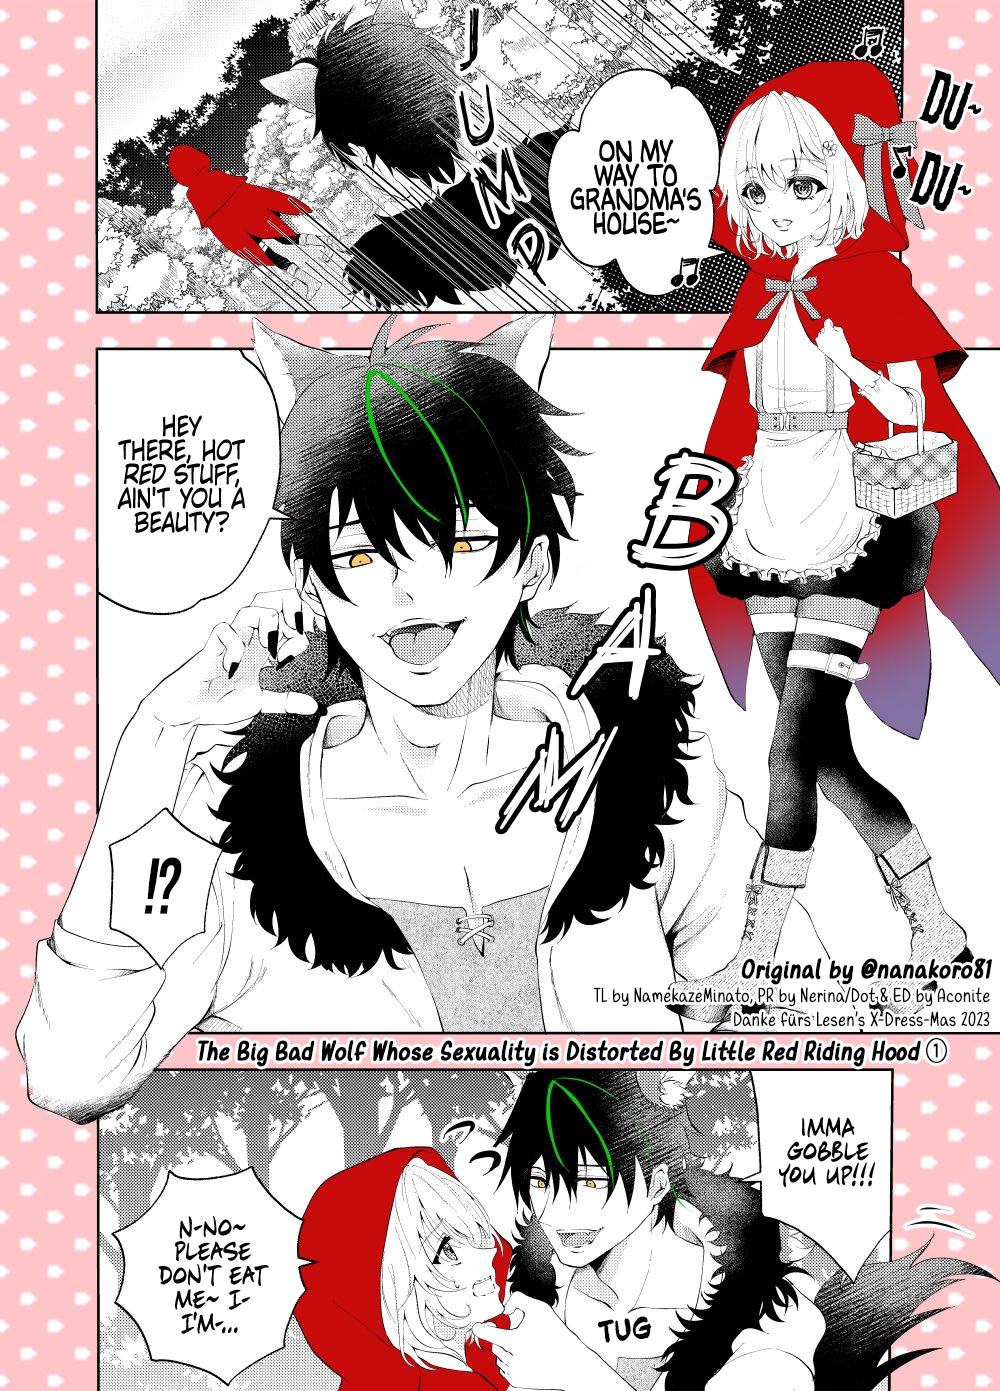 The Big Bad Wolf Whose Sexuality is Distorted By Little Red Riding Hood manga